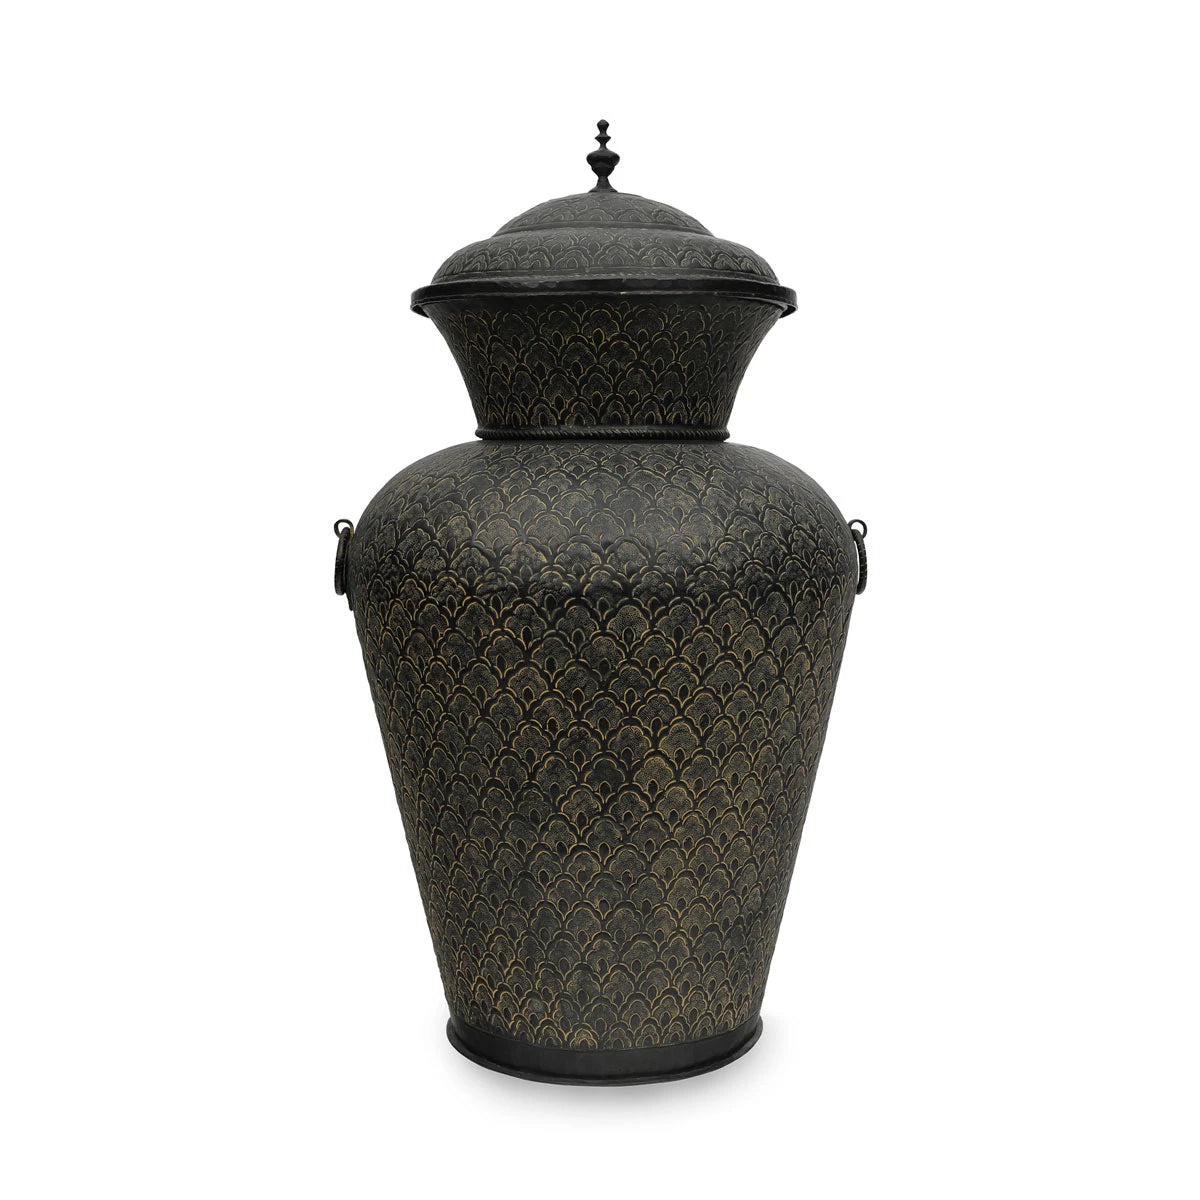 A bold Antique Jar Handmade from brass with embossed clovers in fish scale patterns, aged in time for fine patination